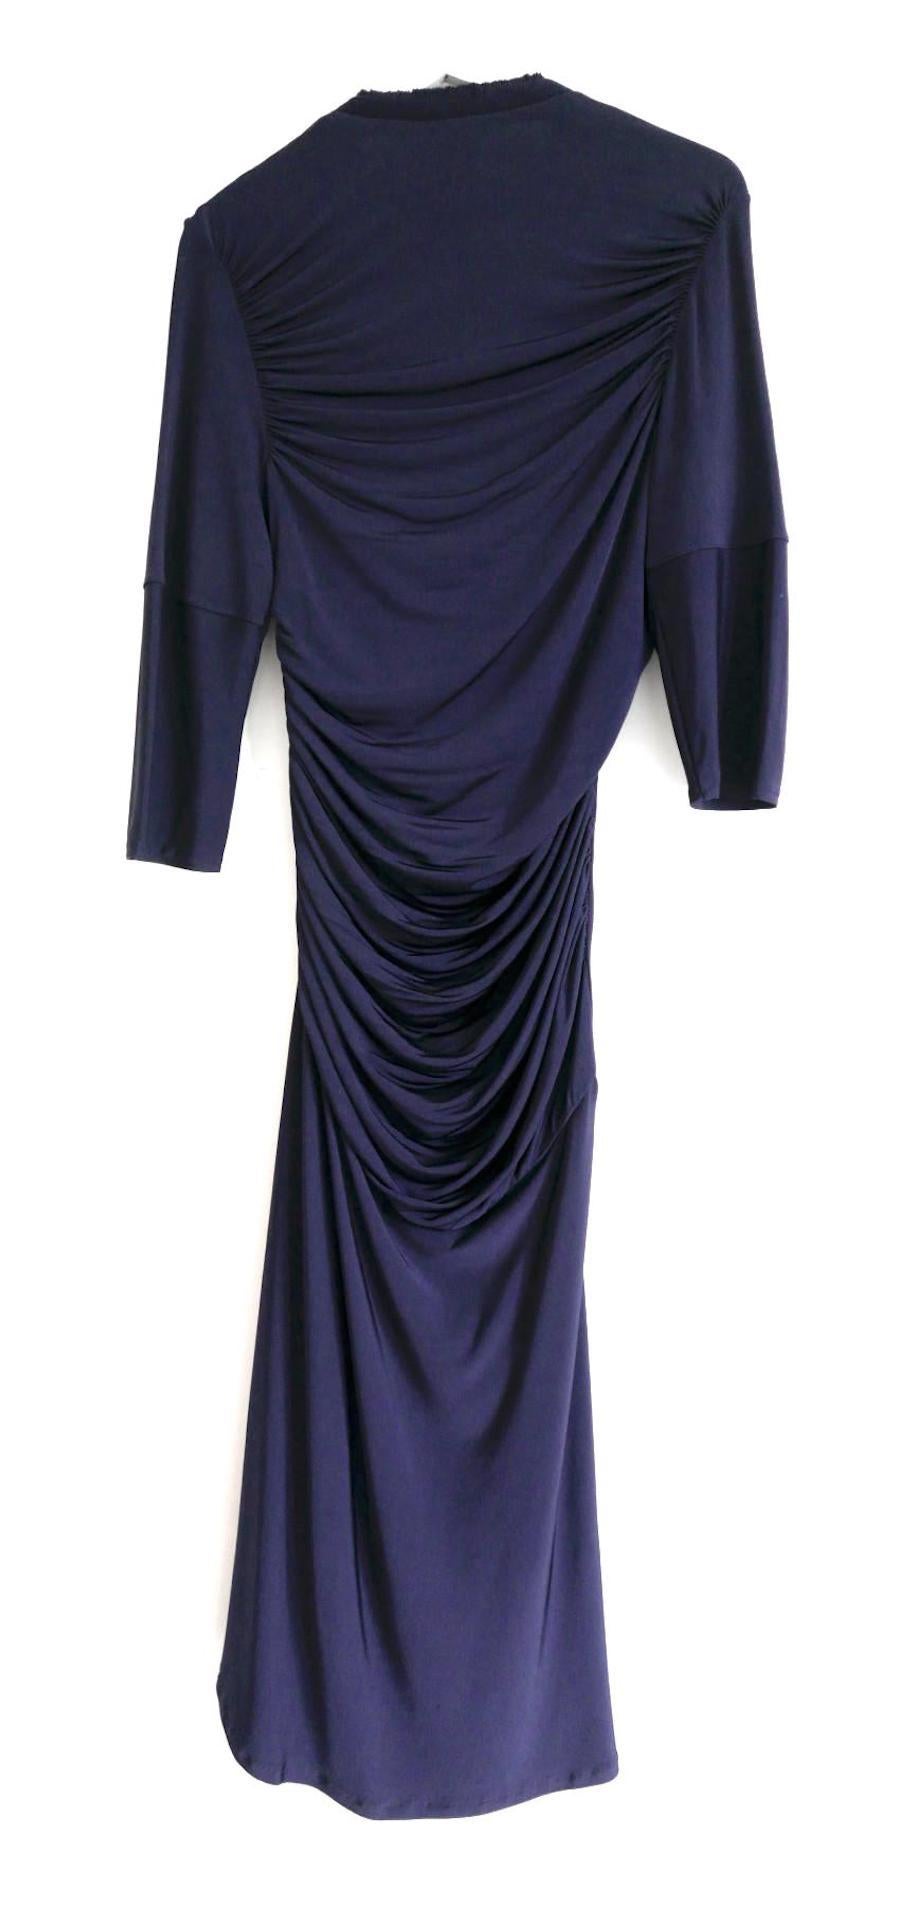 Louis Vuitton SS17 Petrol Blue Draped Jersey Dress In Excellent Condition For Sale In London, GB